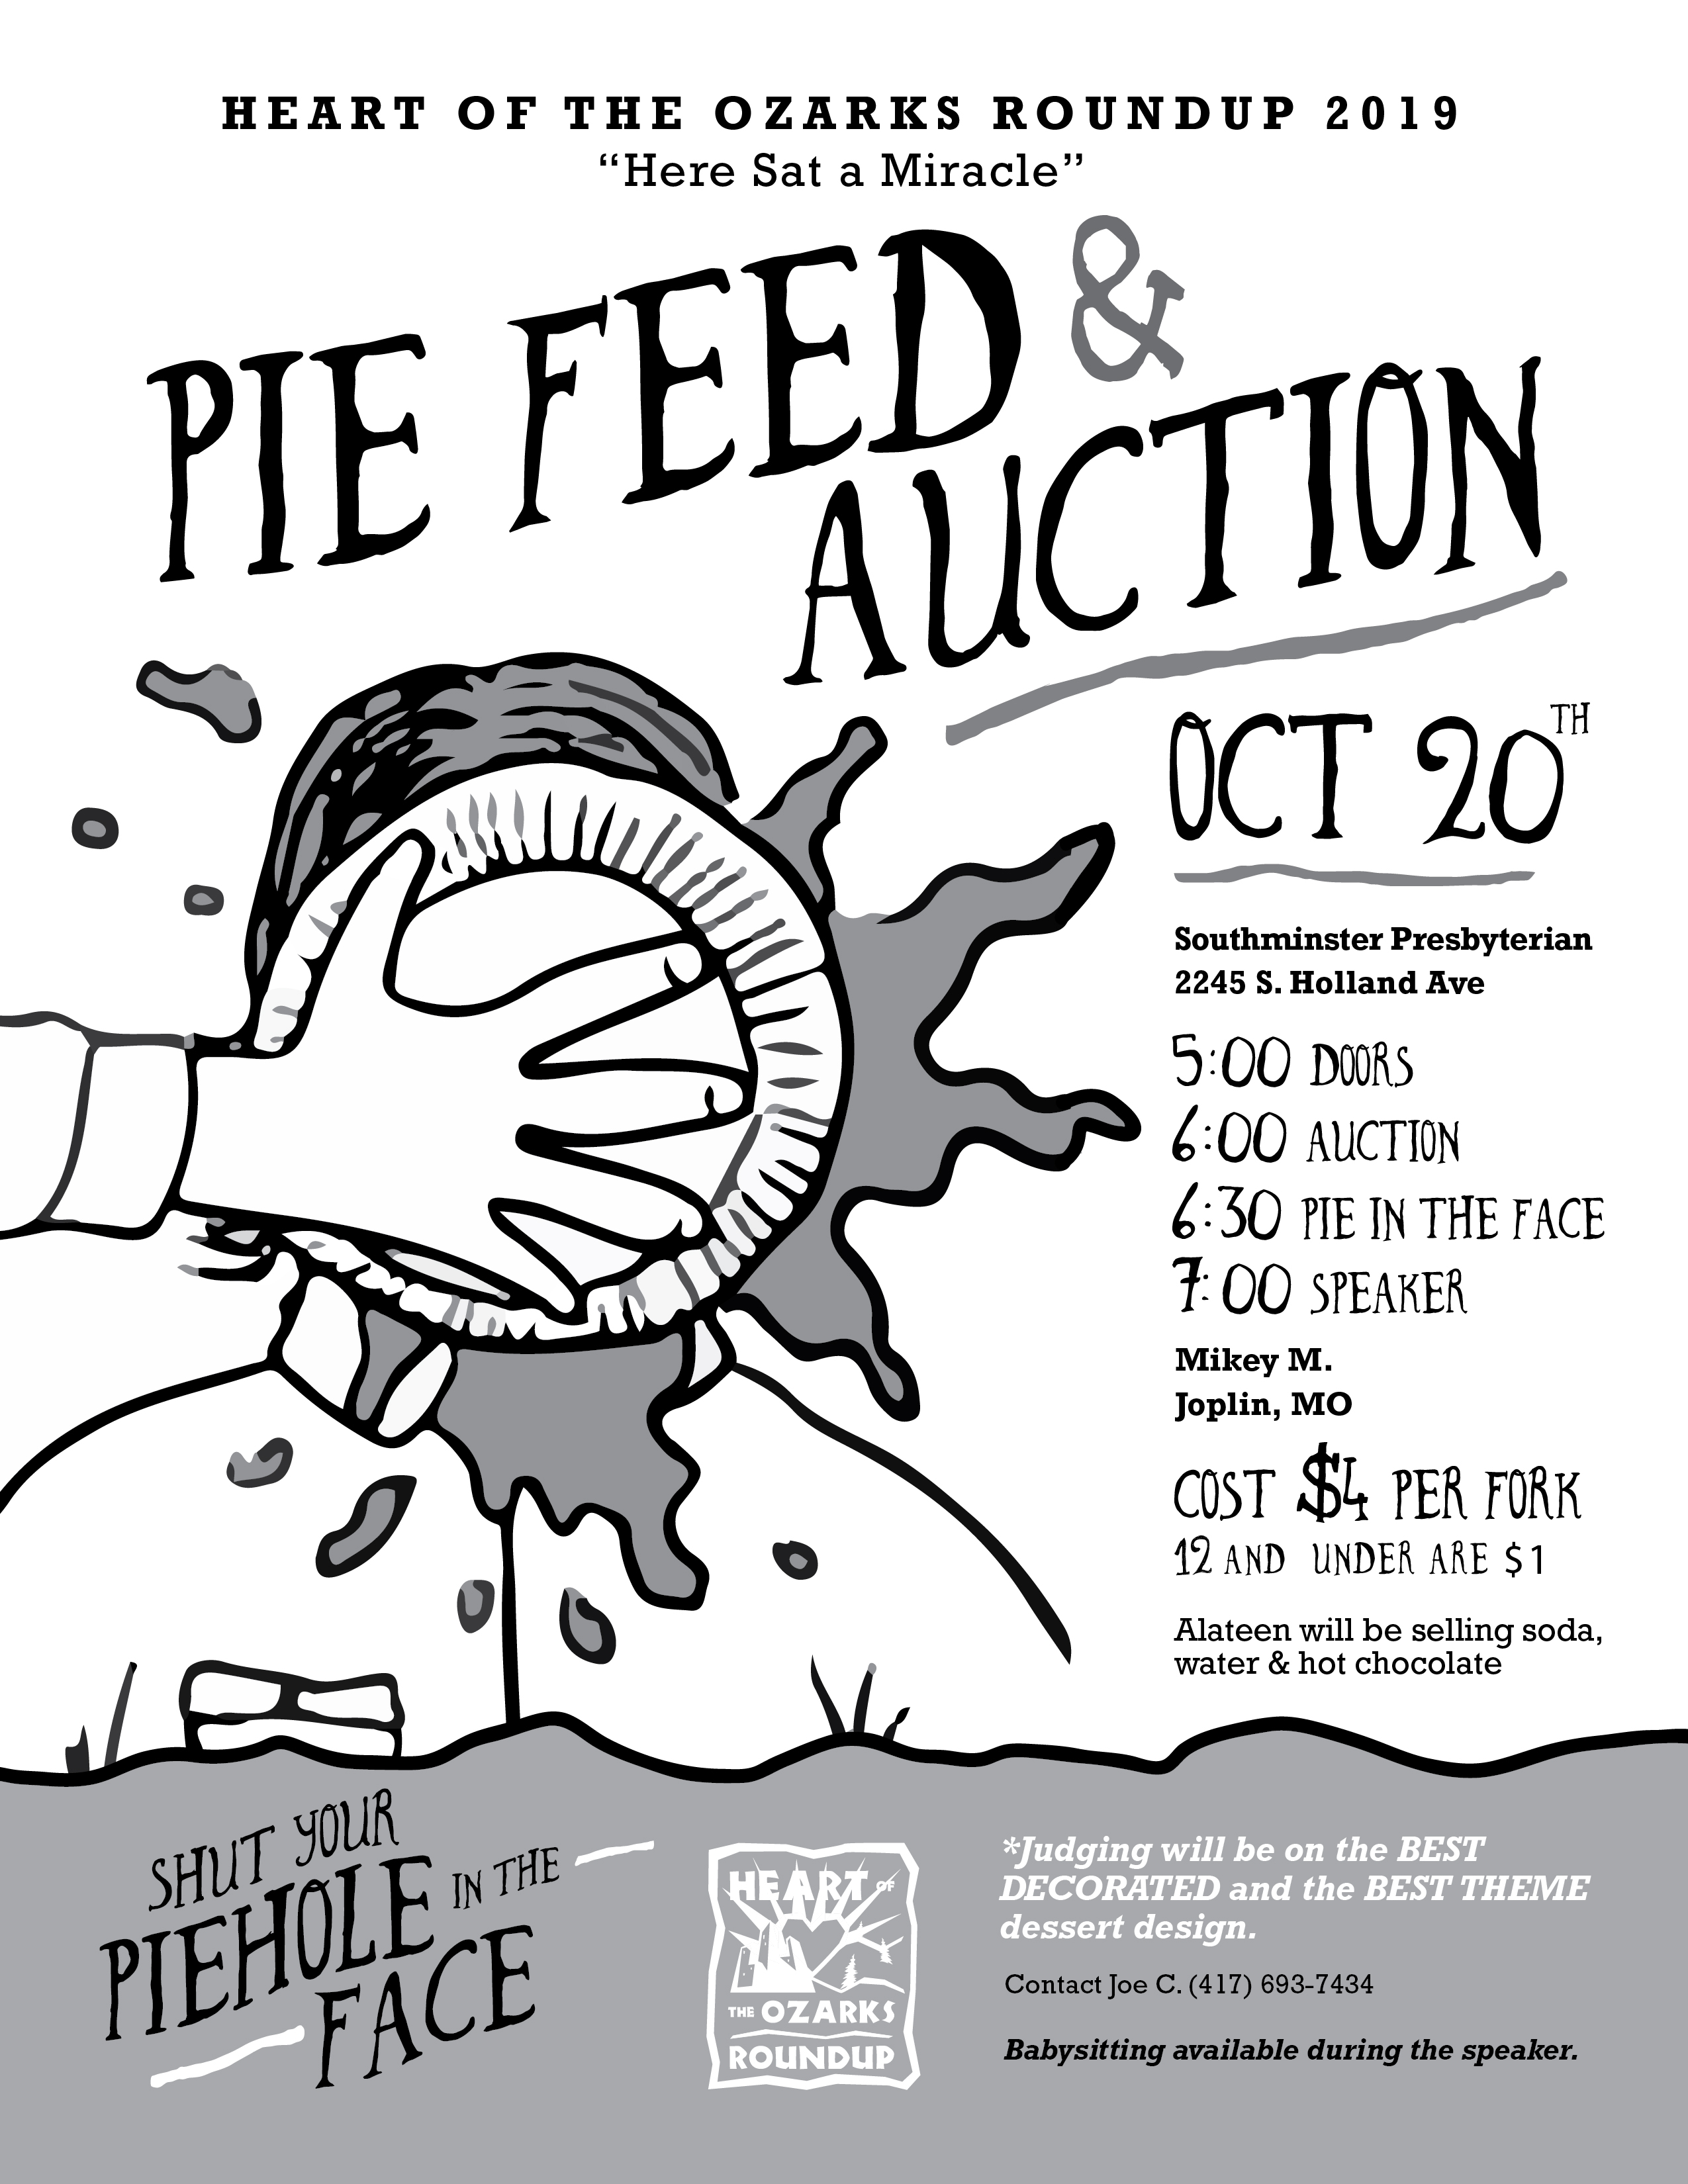 hoto-pie-feed-auction-2018